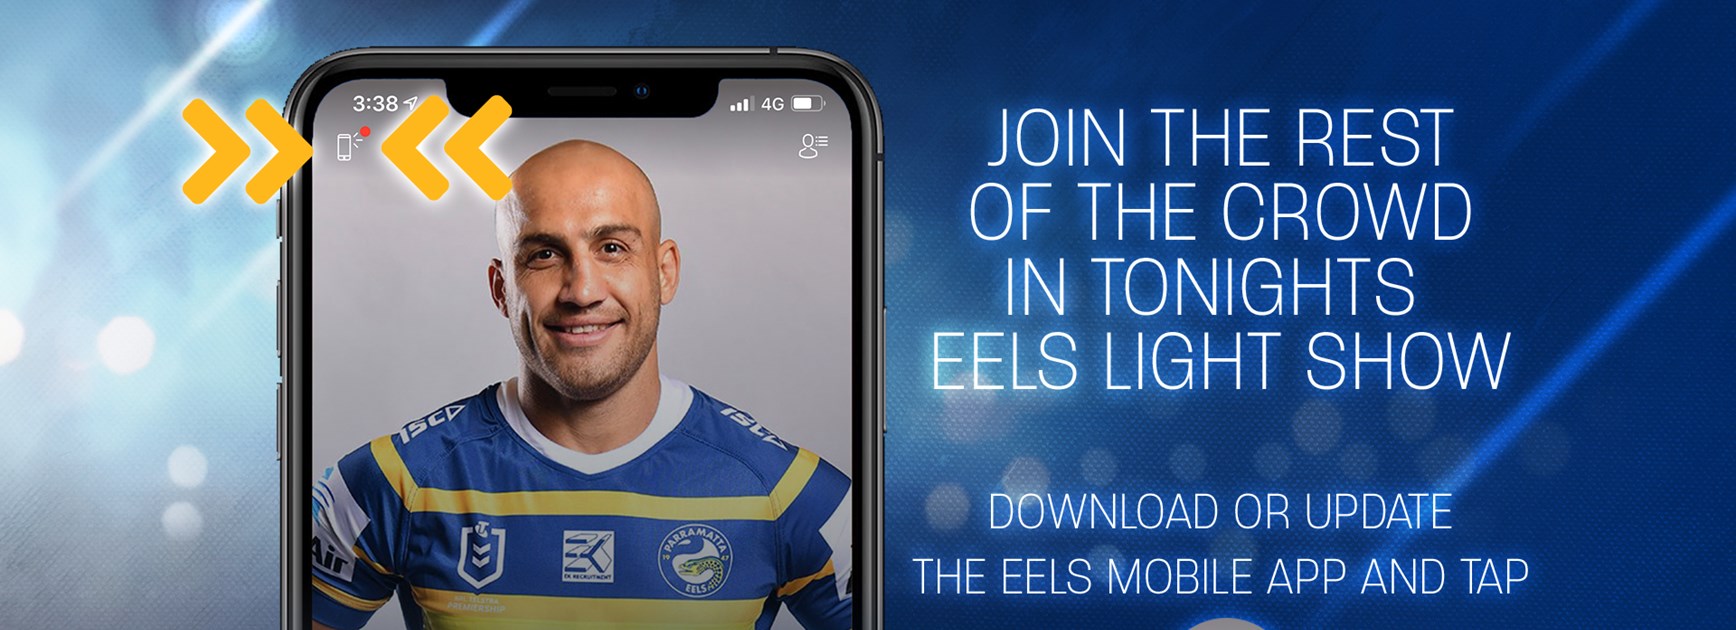 Join the Eels Light Show this Friday night!